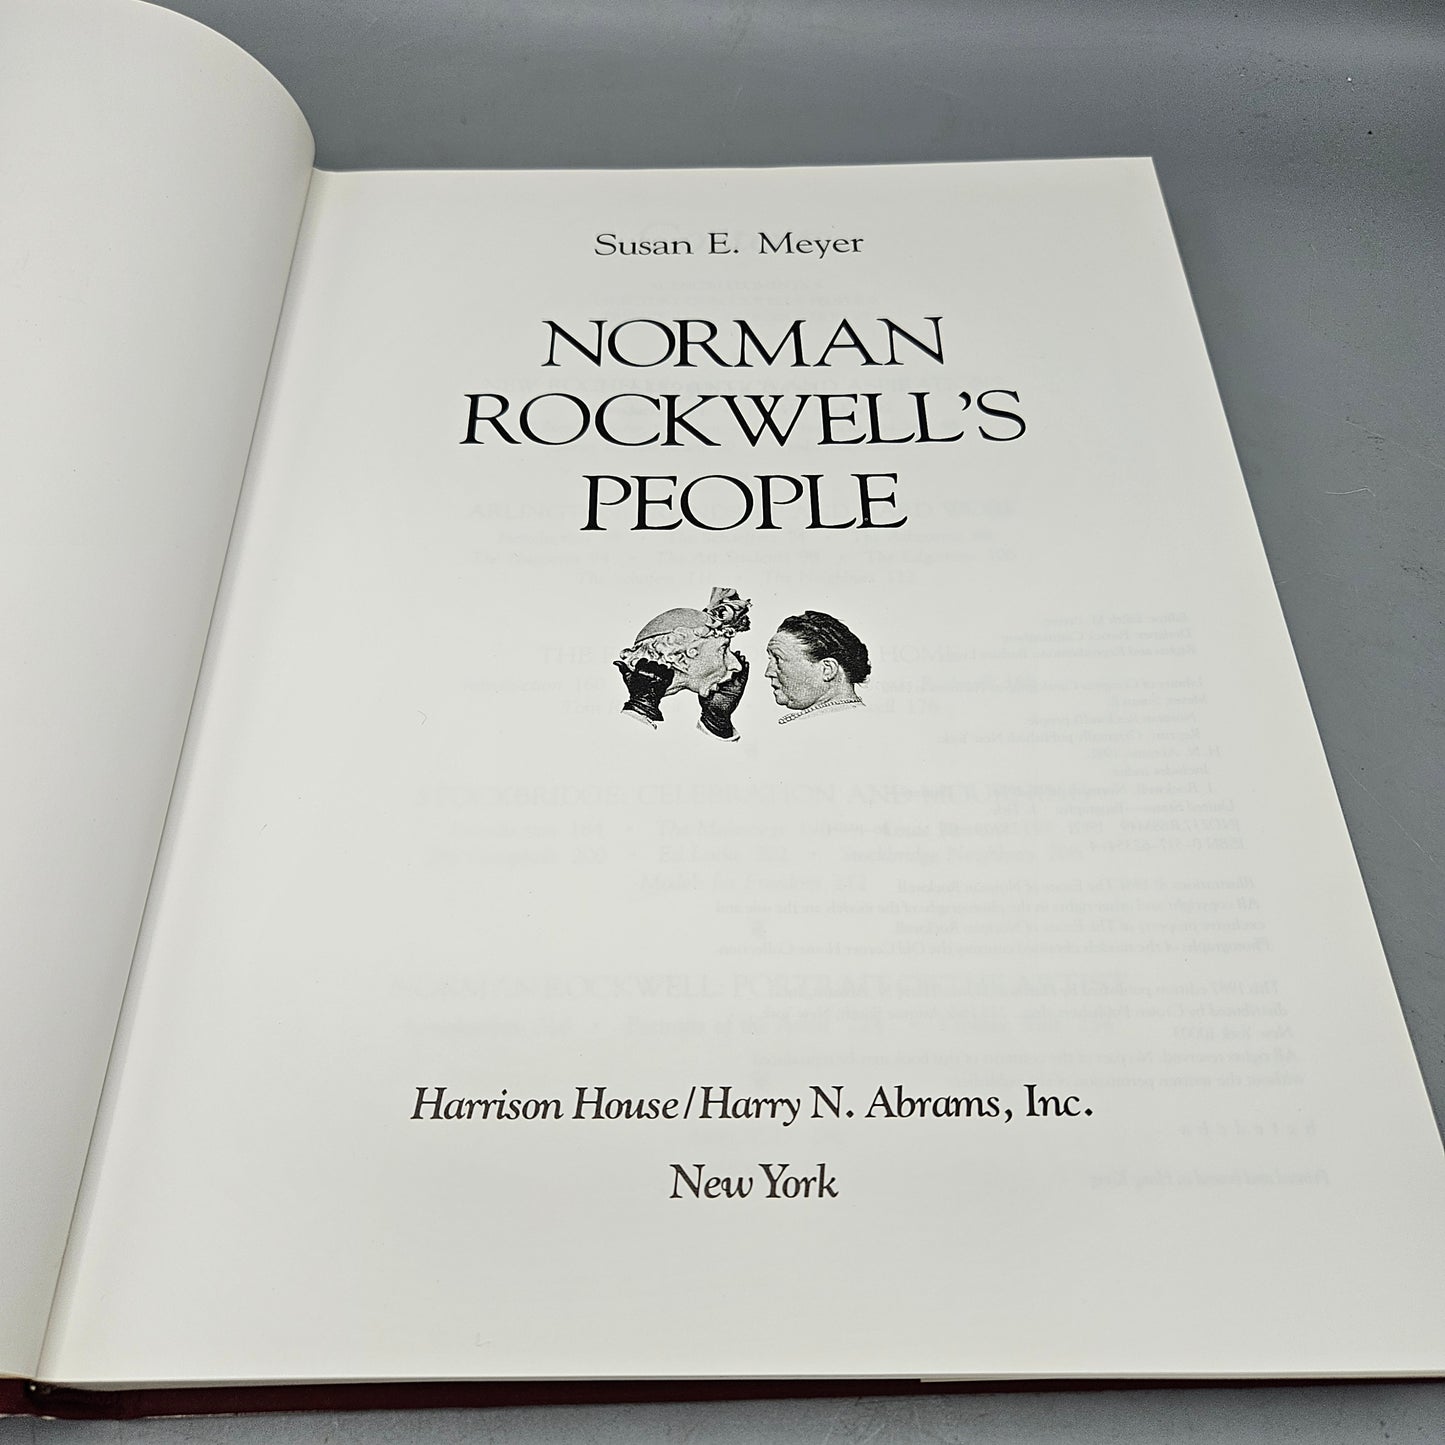 Book: Norman Rockwell's People by Susan E. Meyer (1981, Hardcover)